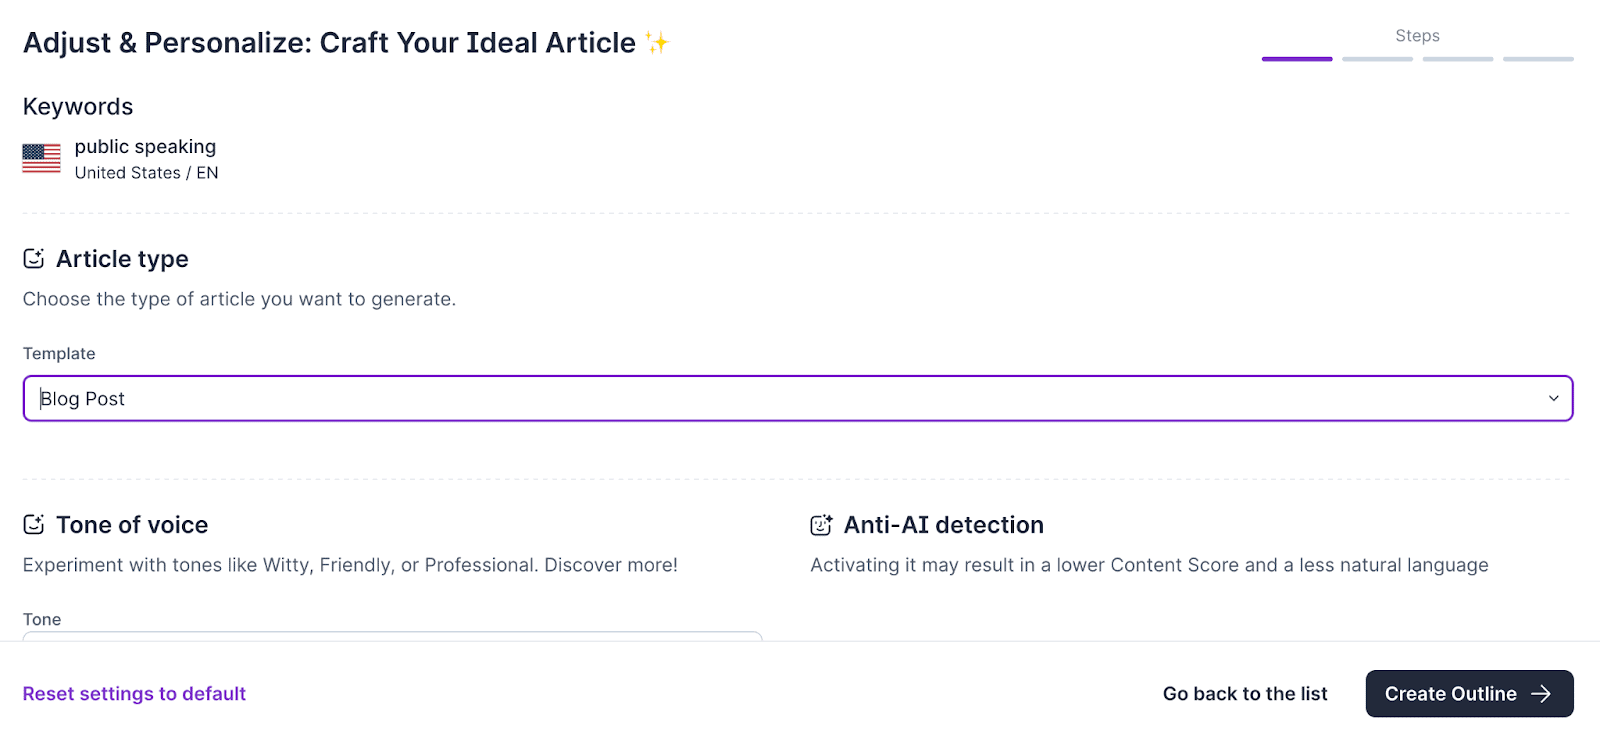 Craft Your Ideal Article